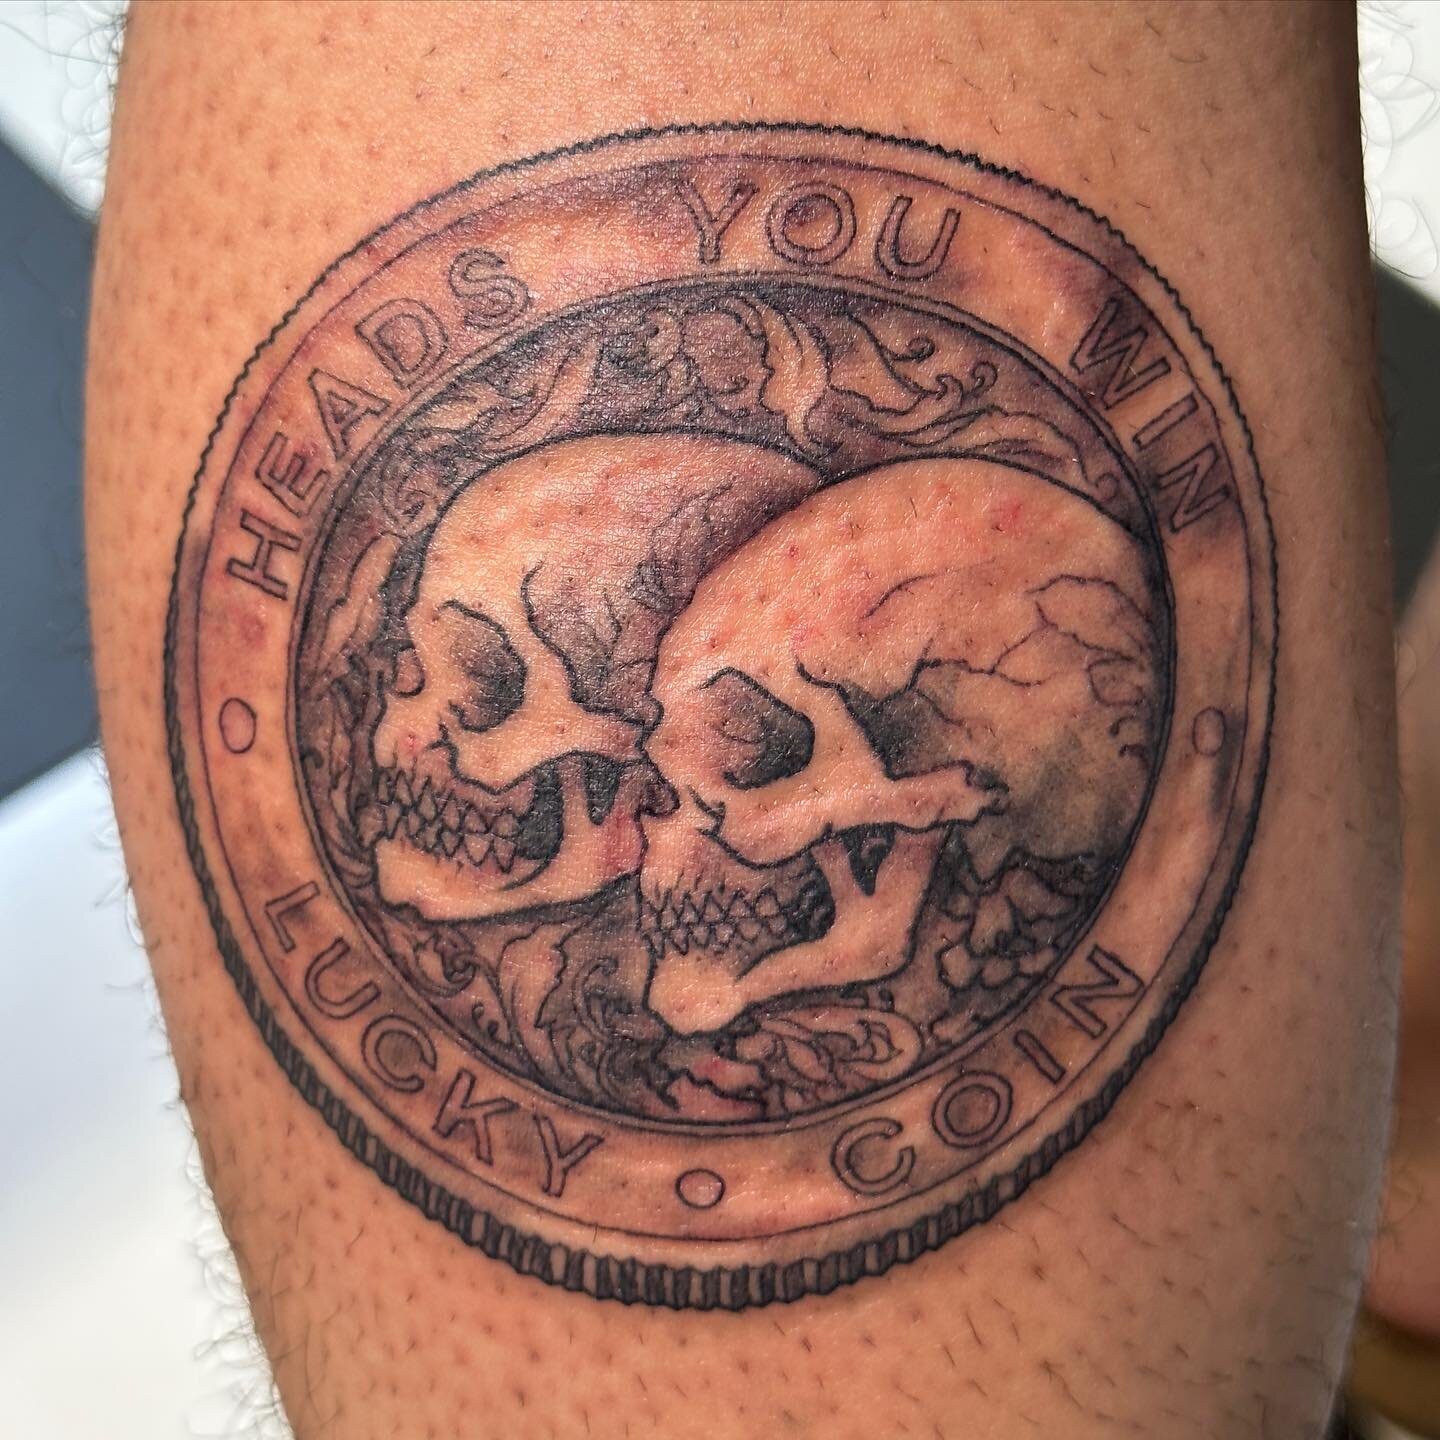 Thank you Jesse for this cool idea and for letting me have some fun with it.  1936 Roosevelt Campaign Coin. @jessewaite 

#skulls #1936roosevelt #coin #tattoo #blackadgrey #calftattoo #filigree #skulltattoo 
 @shamrocktattoocompany
#tattoo #sabre #ta